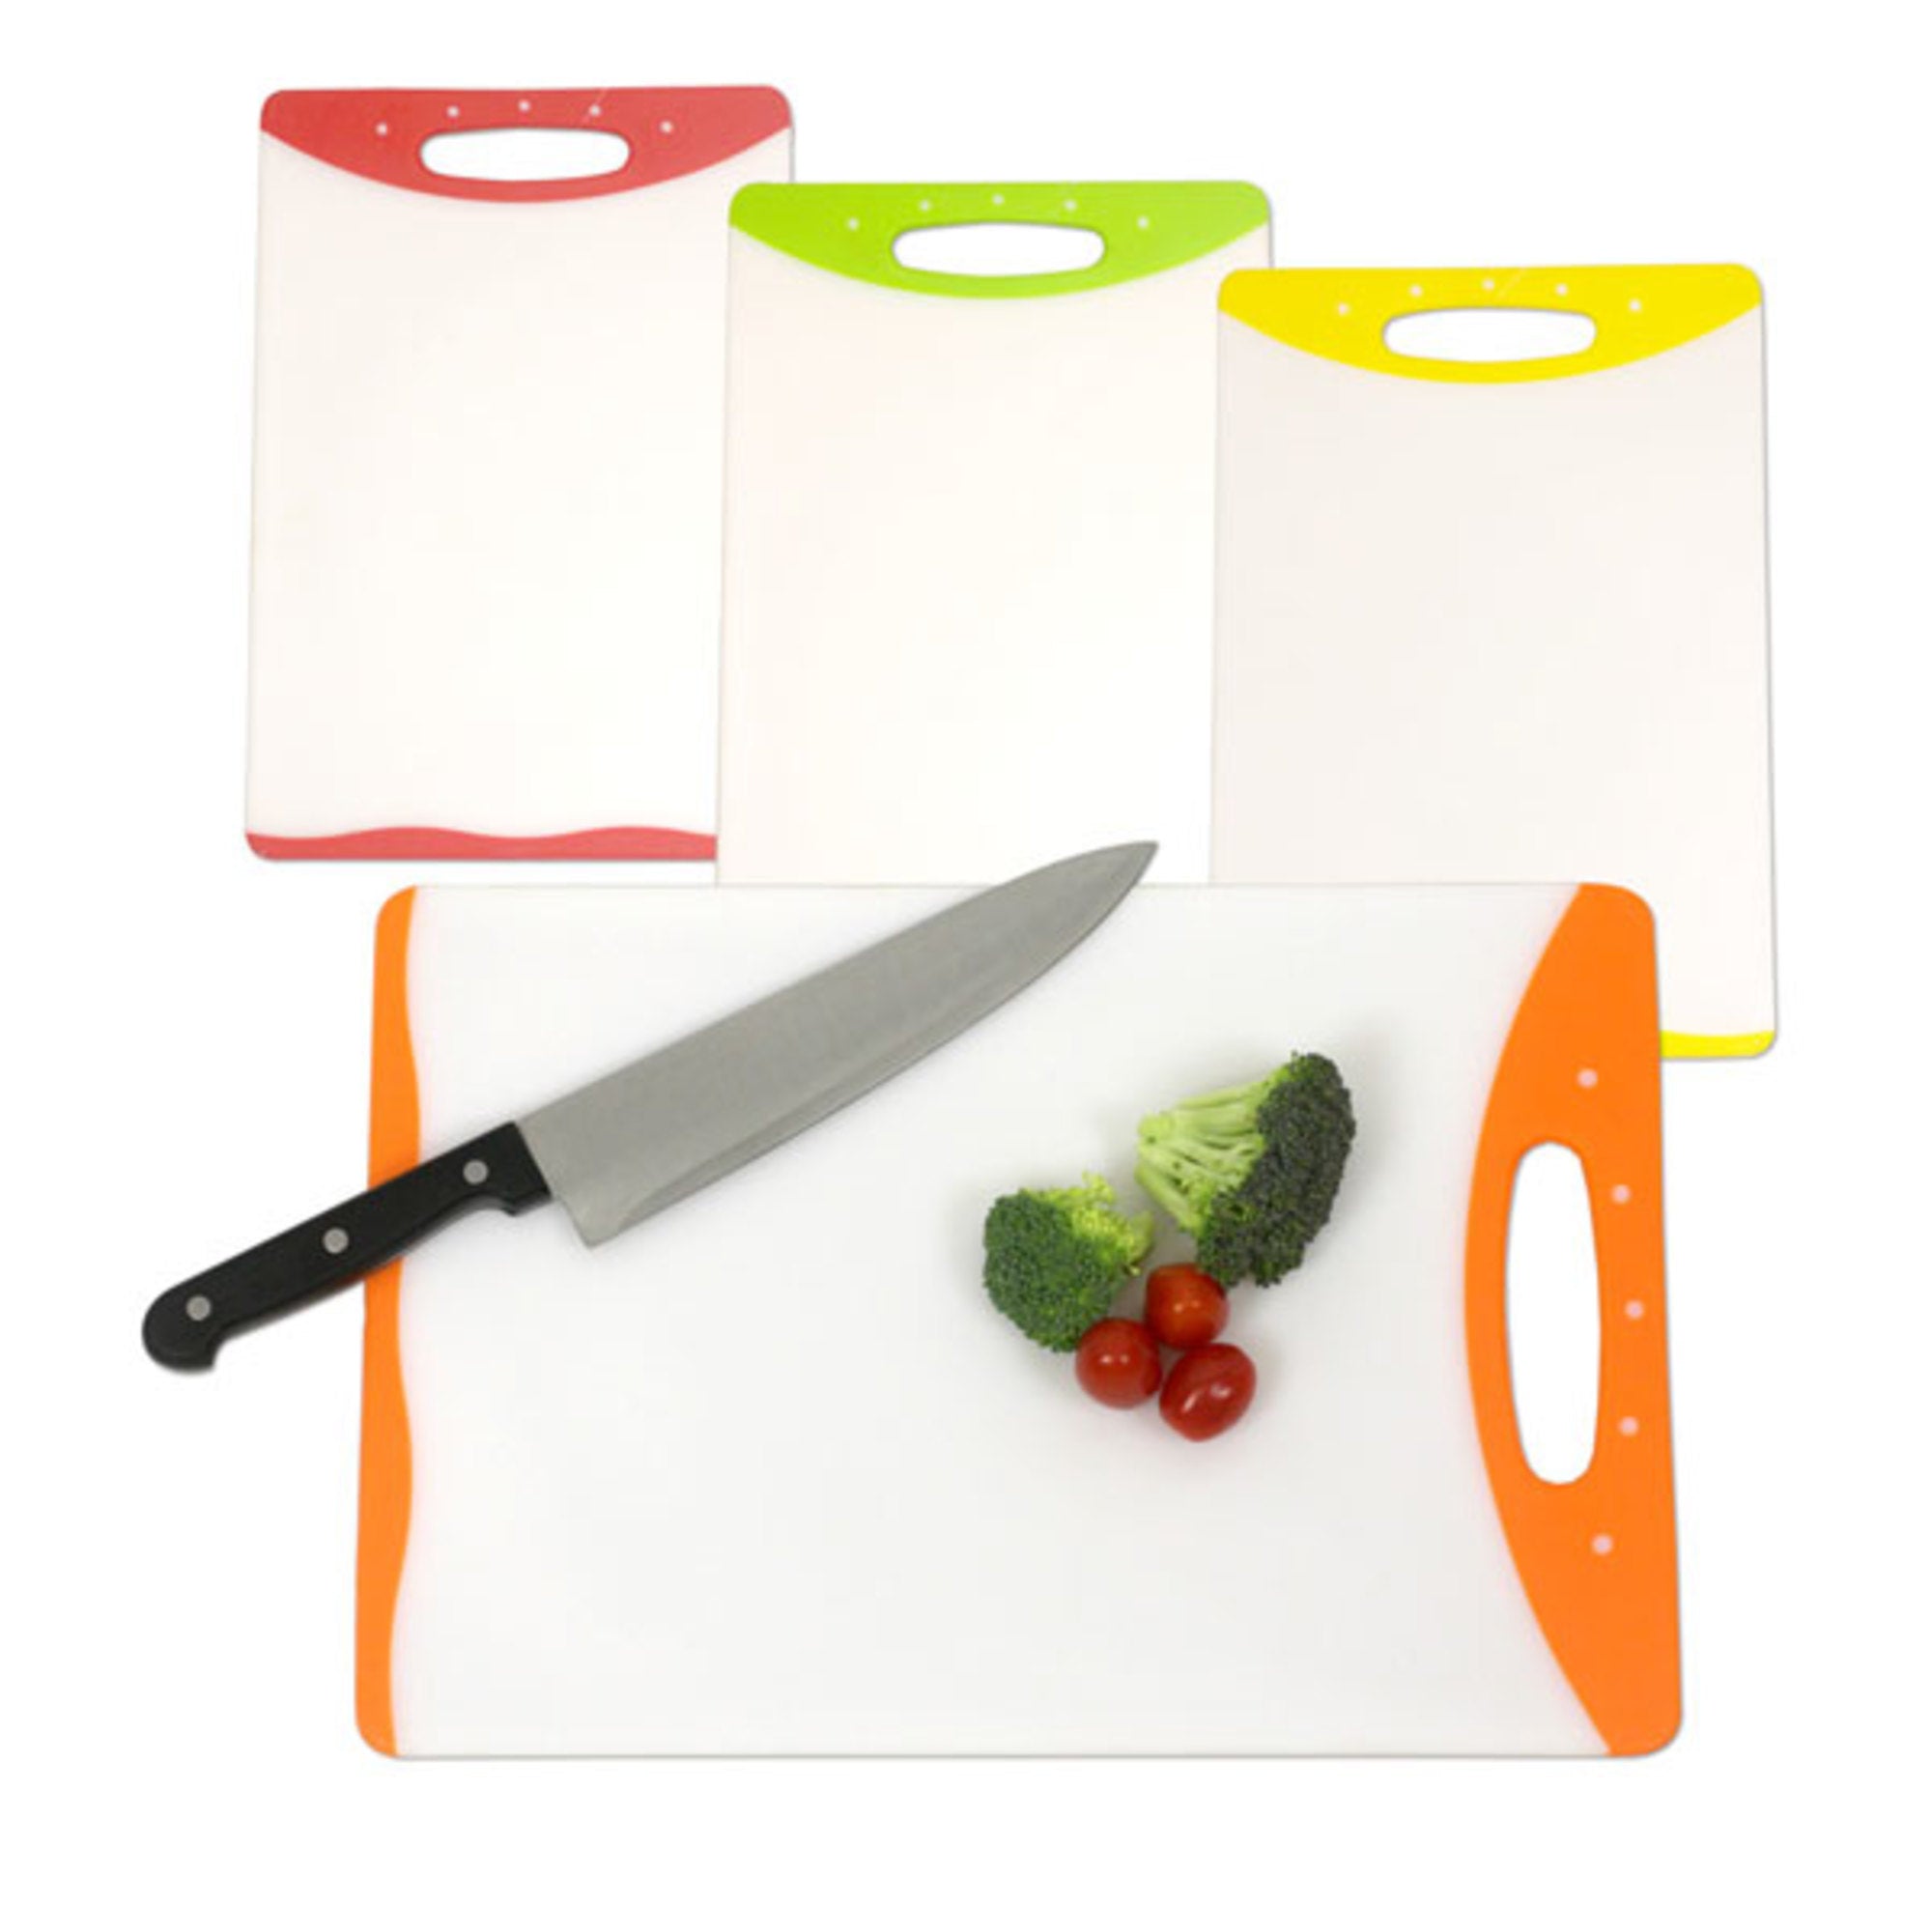 Home Basics Dual Sided Plastic Cutting Board with Non-Slip Edges, (10" x 15") - Assorted Colors